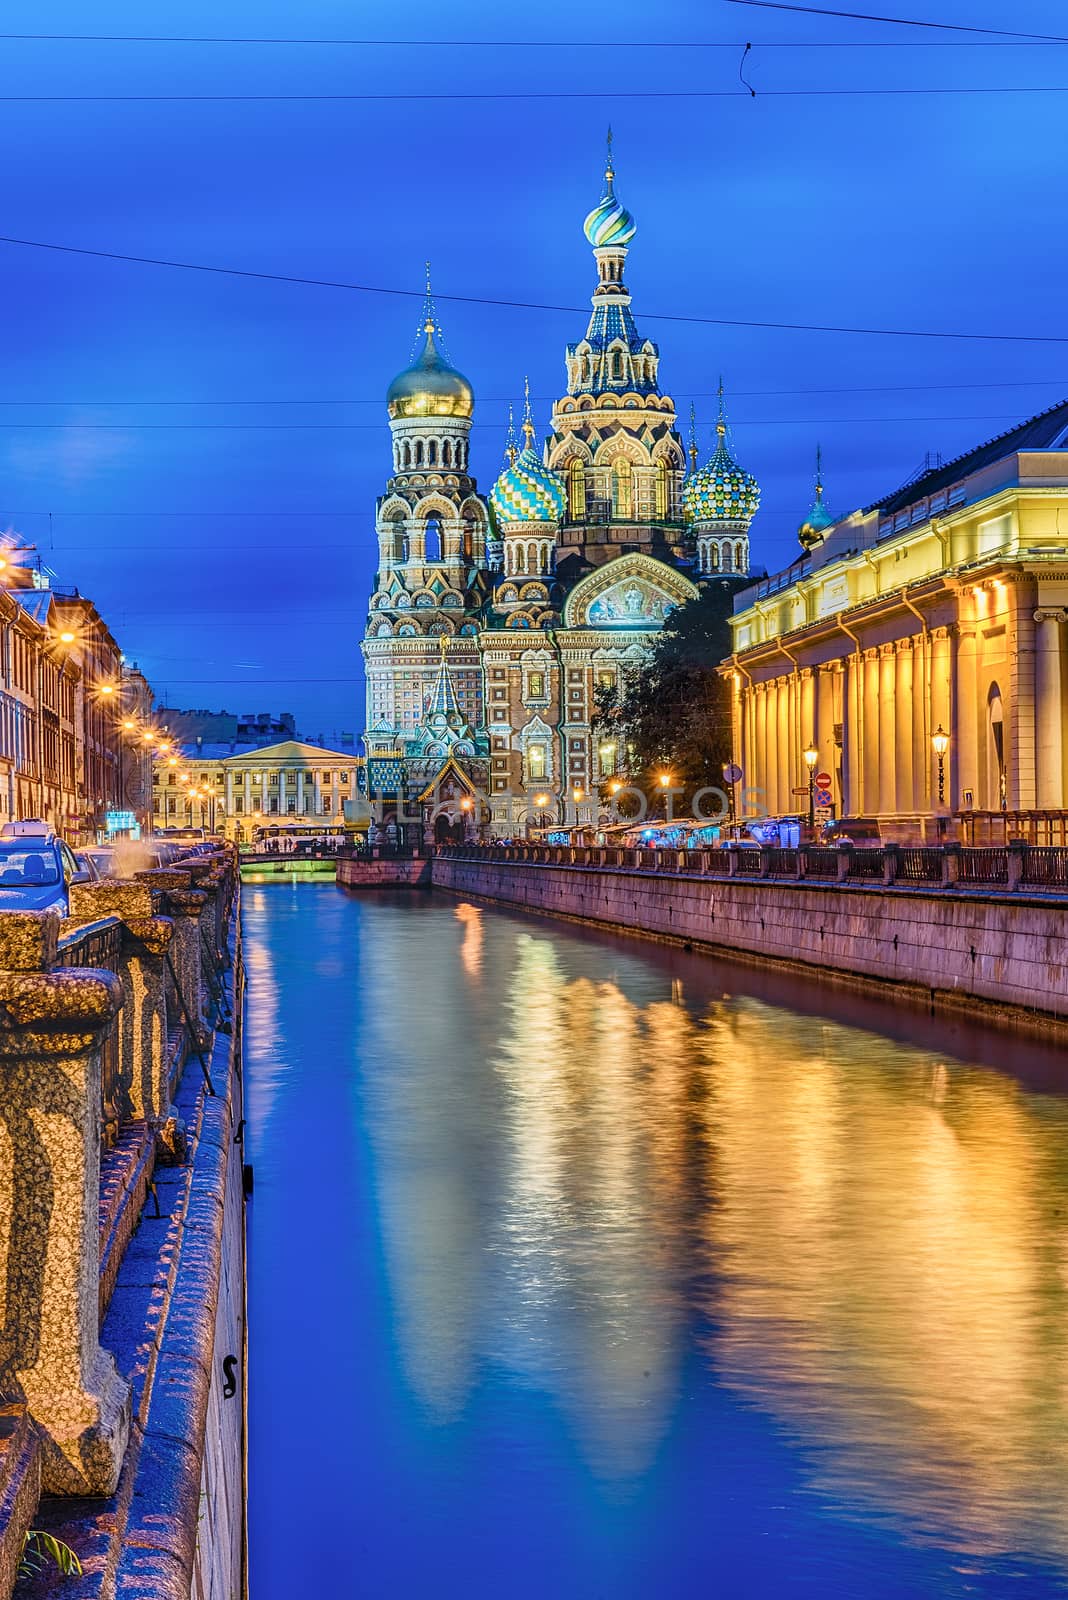 Church of the Savior on Spilled Blood at night. Iconic landmark in St. Petersburg, Russia